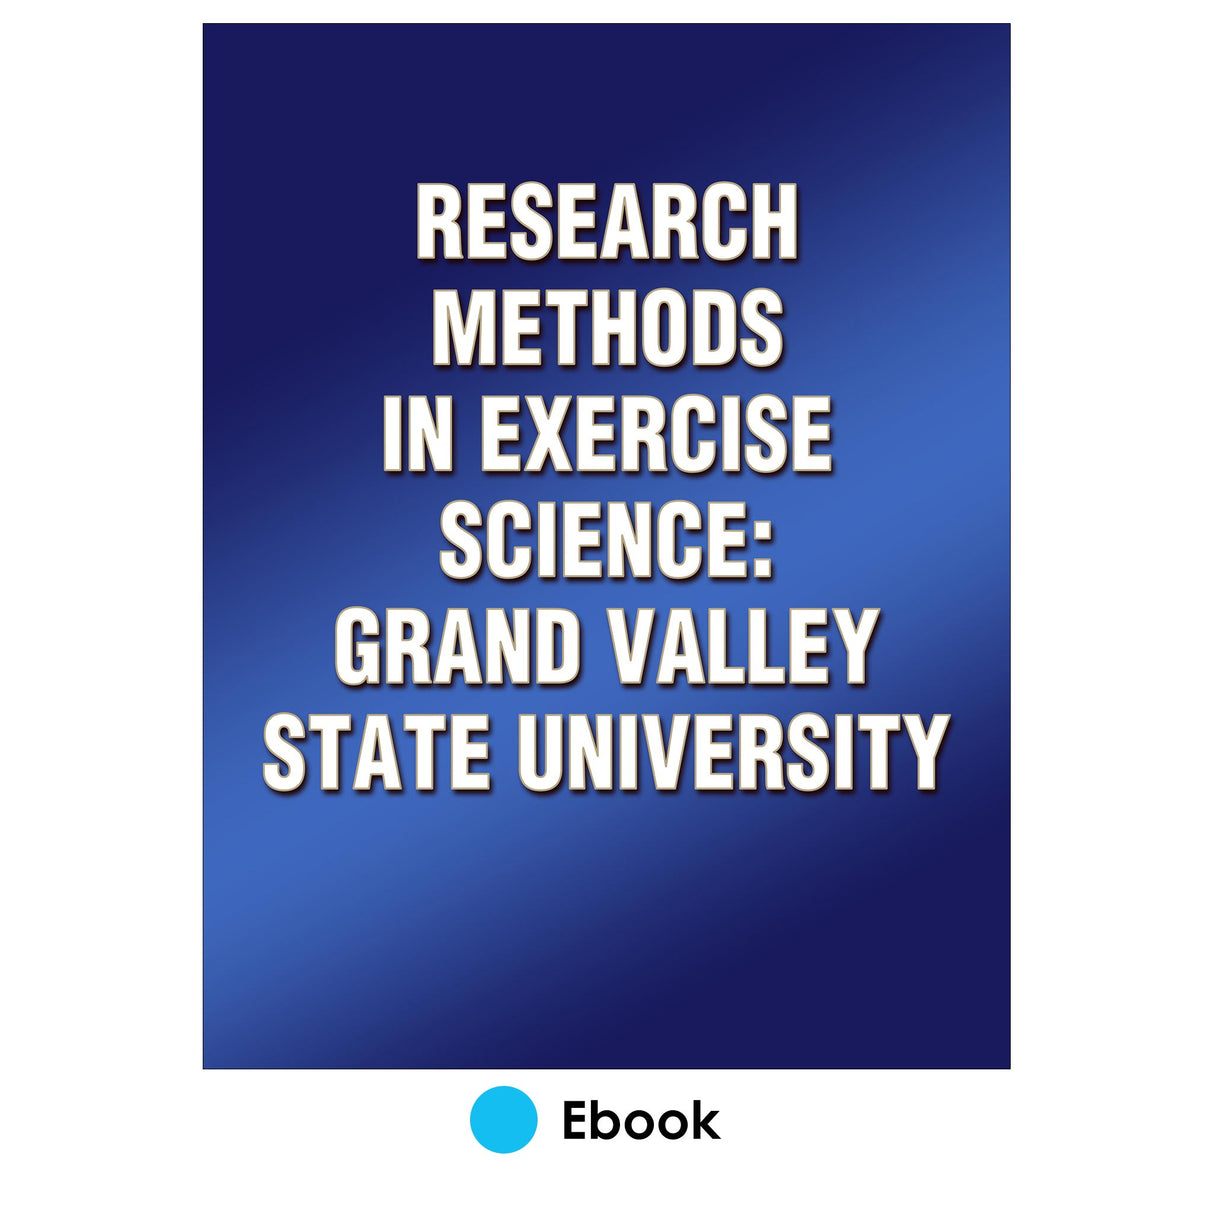 Research Methods in Exercise Science: Grand Valley State University